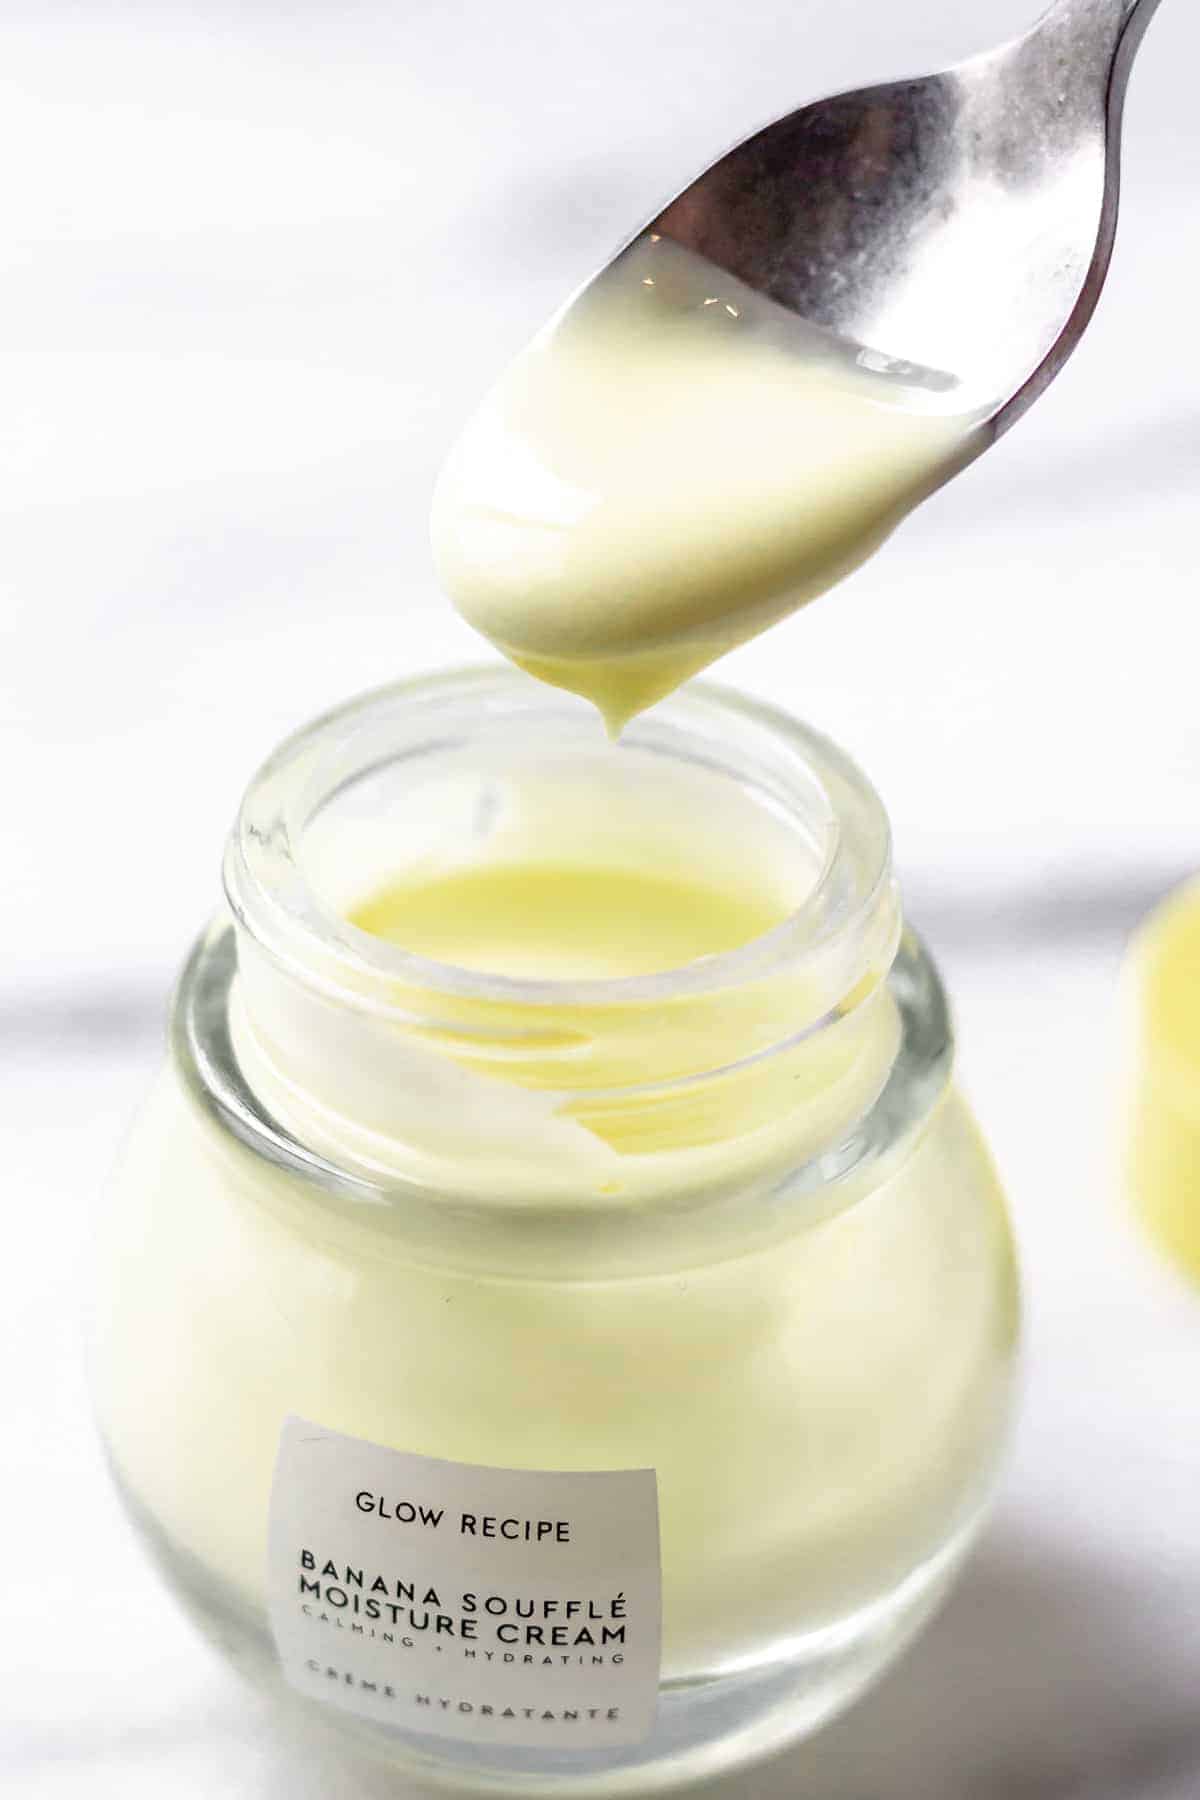 Jar of Glow Recipe Banana Souffle with a small spoon scooping some up